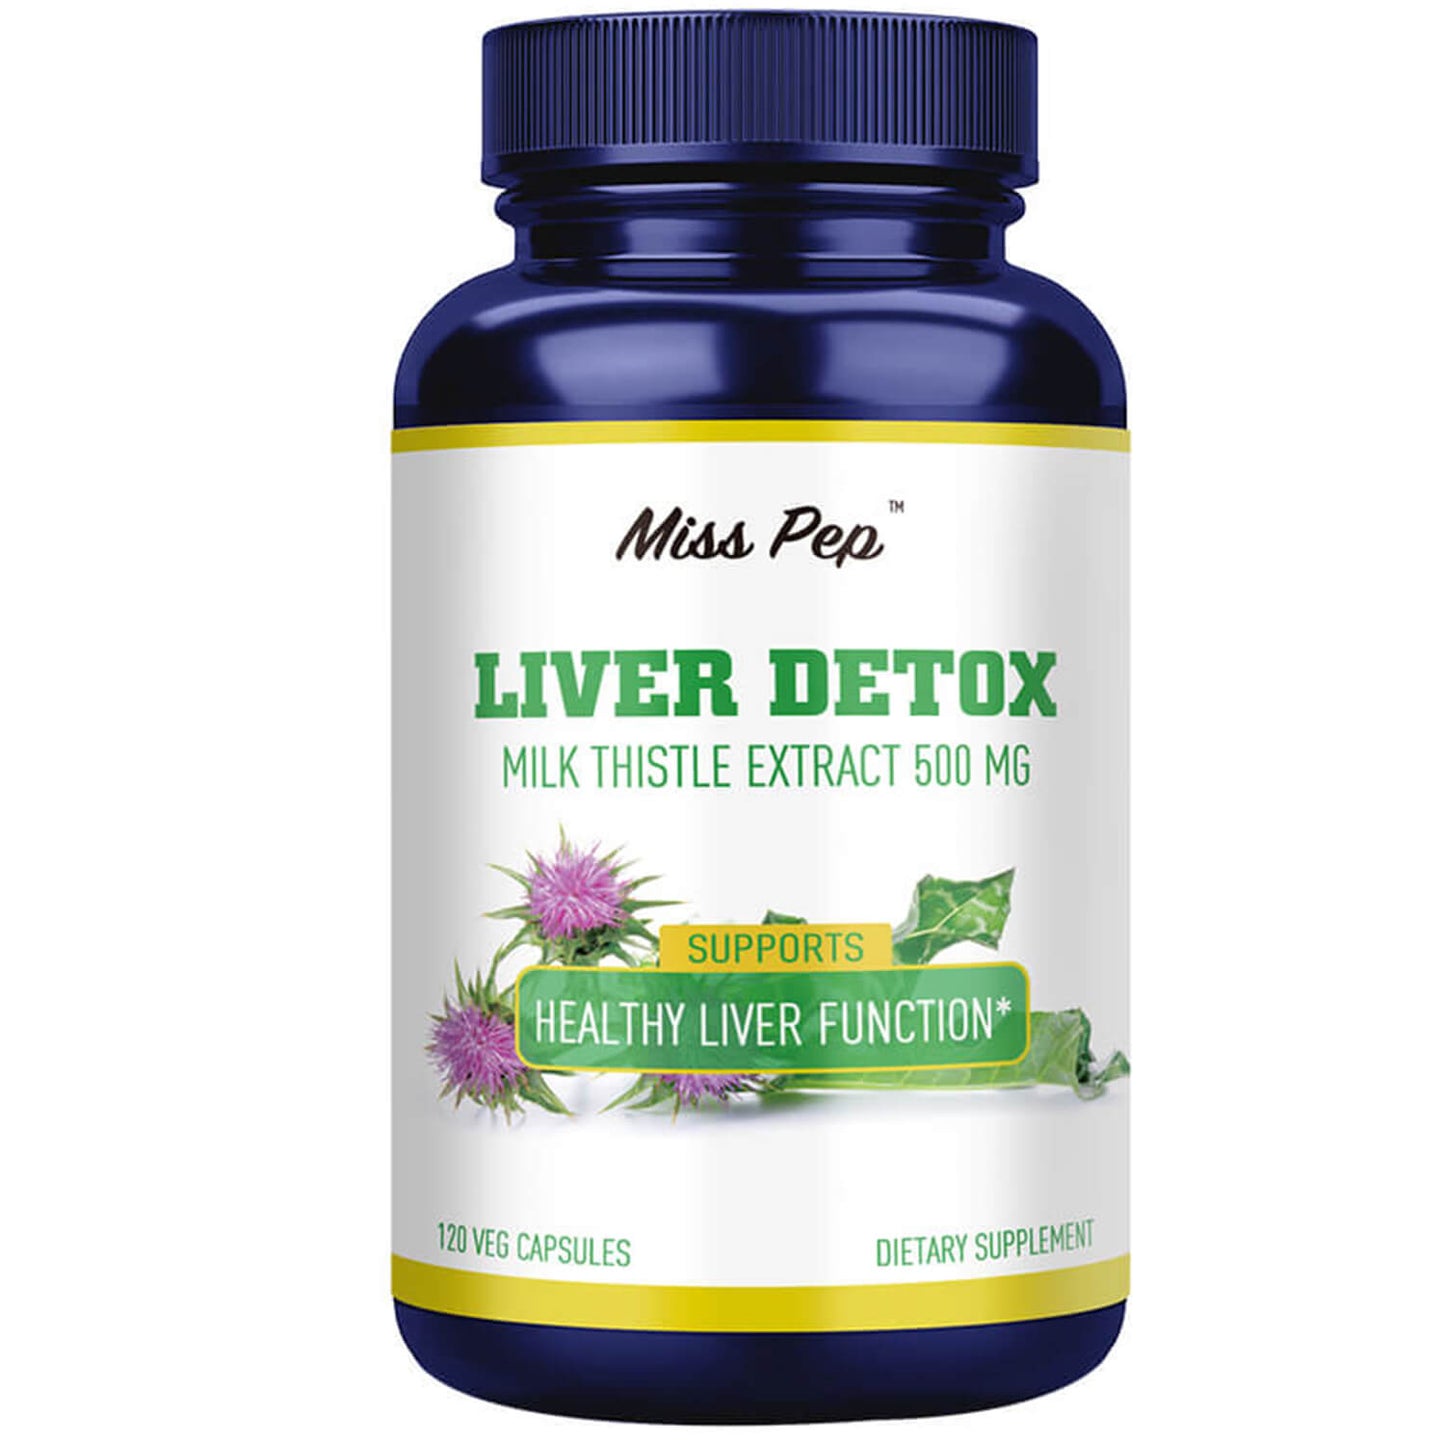 Misspep Liver Detox Milk Thistle Extract 500 mg with Artichoke Extract for Healthy Liver